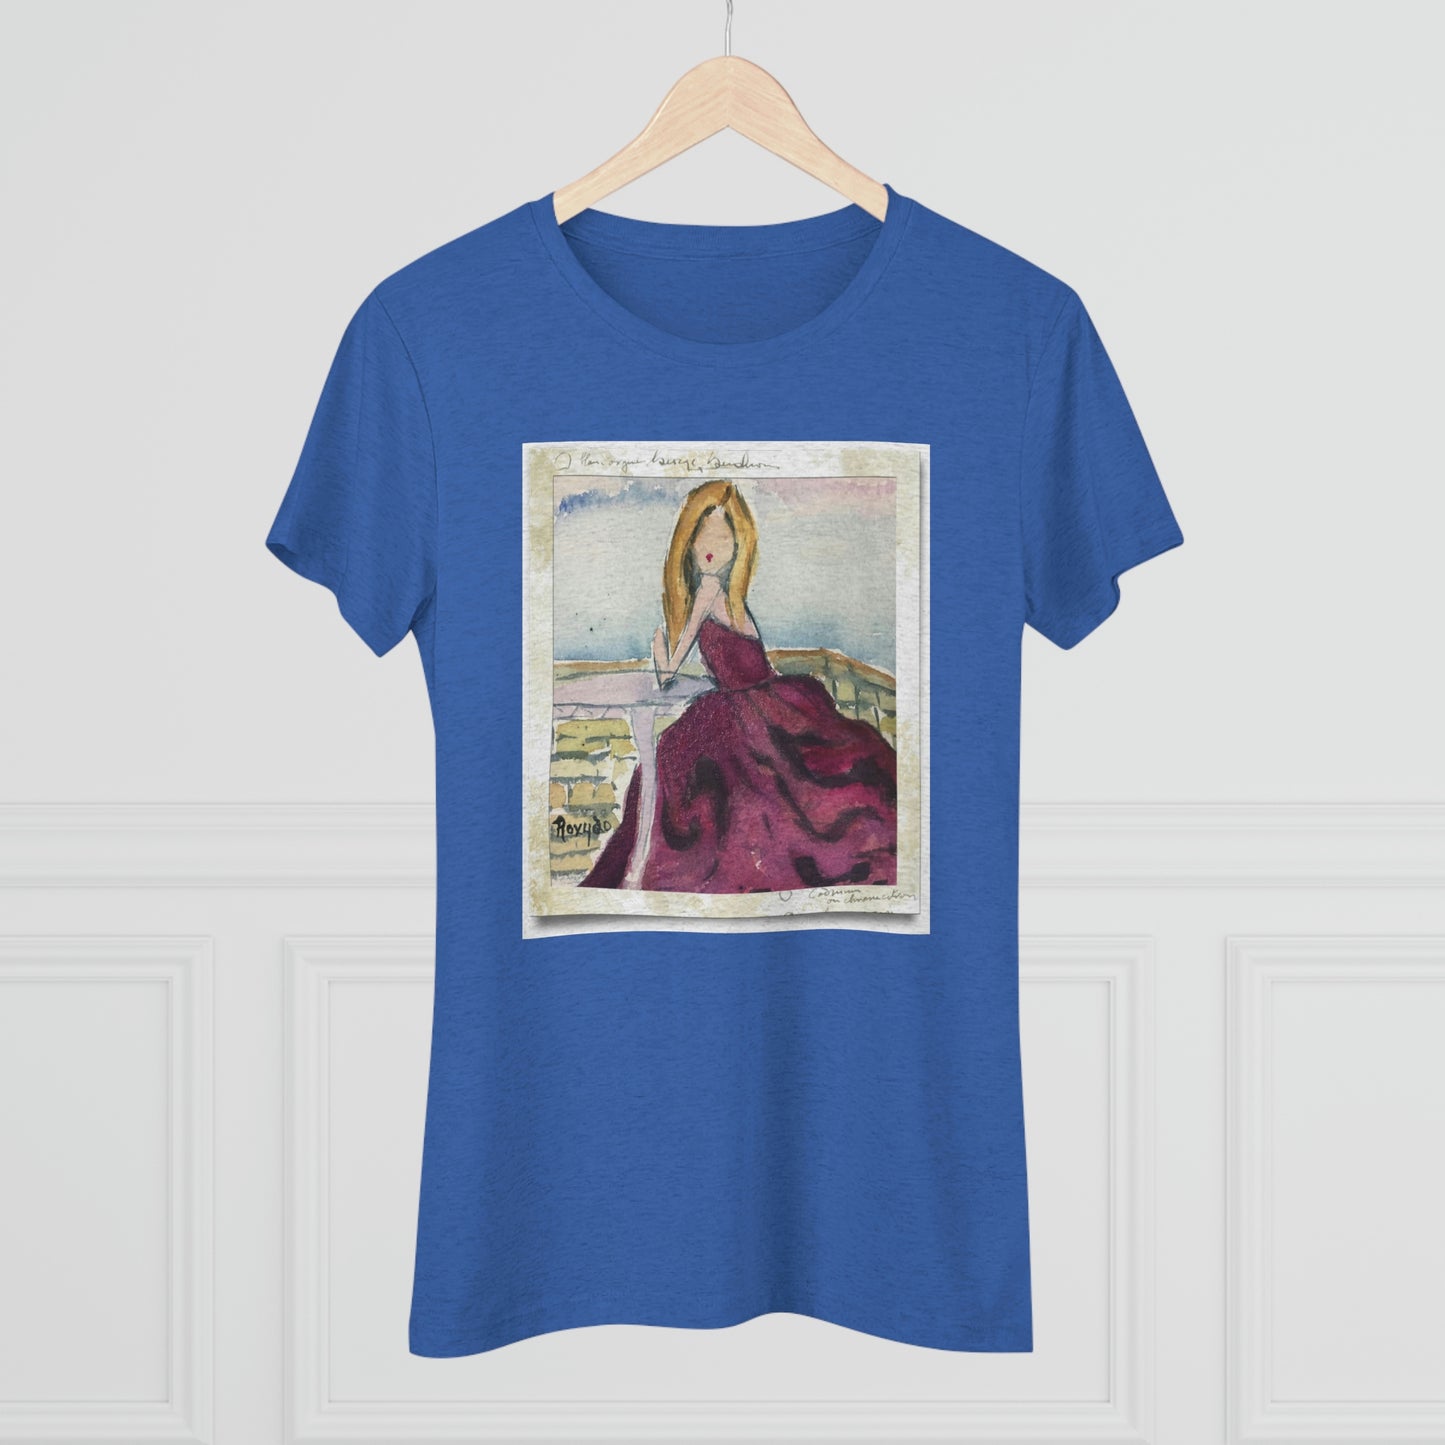 Beach Babe in a Gown Women's fitted Triblend Tee  tee shirt